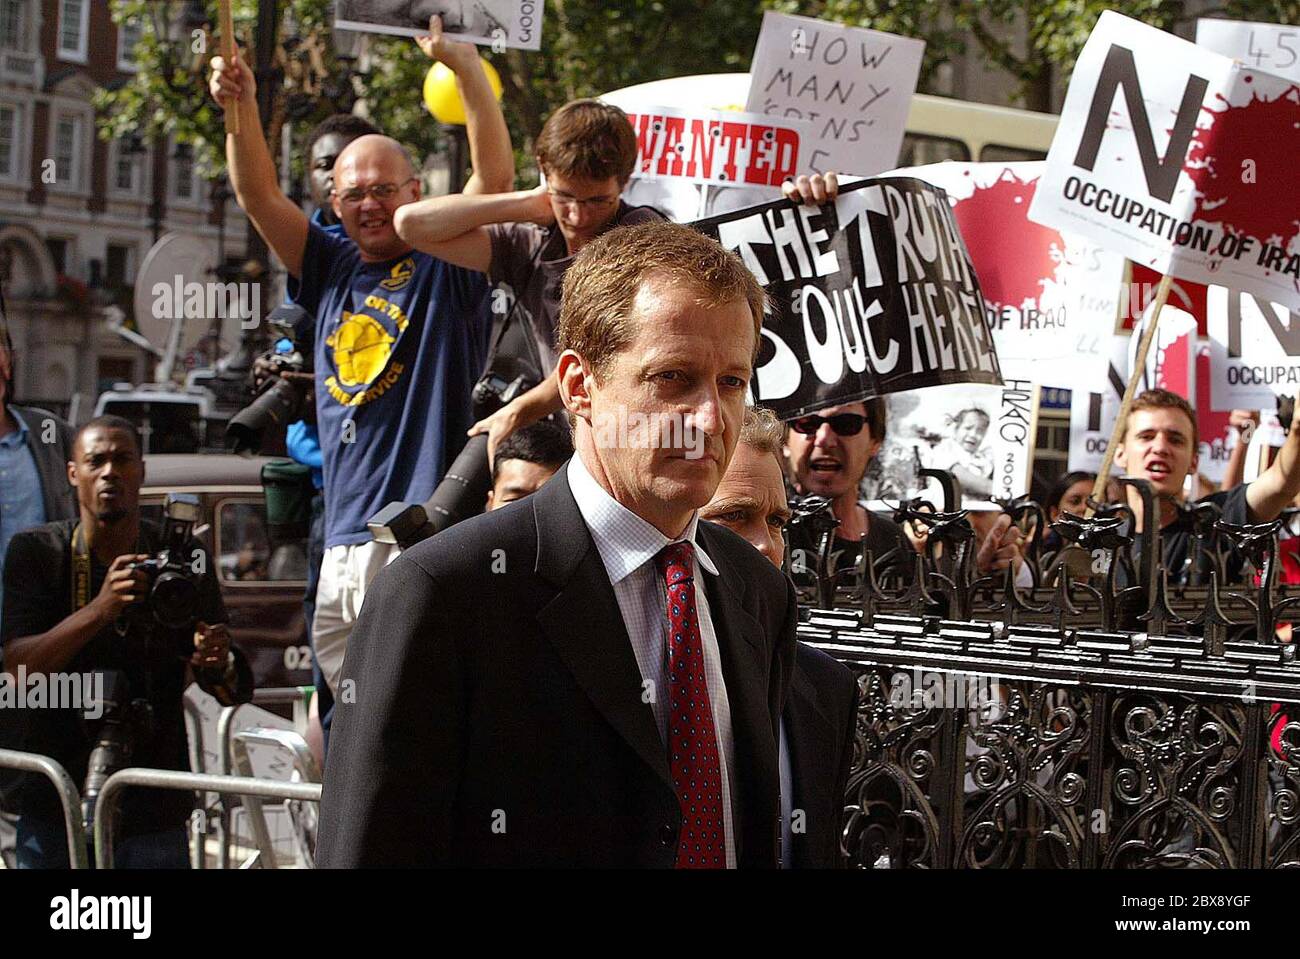 Alistair Campbell, Director of Communications to Britain's Prime Minister Tony Blair, arrives at the Royal Courts of Justice to give evidence to the Hutton Inquiry into the death of government weapons expert Dr David Kelly, in London, August 19, 2003. A potentially explosive inquiry into the suicide of British scientist Kelly will quiz Blair's right-hand man Campbell on Tuesday about the case made for war in Iraq and the scientist's death. Picture : James Boardman Press Photography. Stock Photo